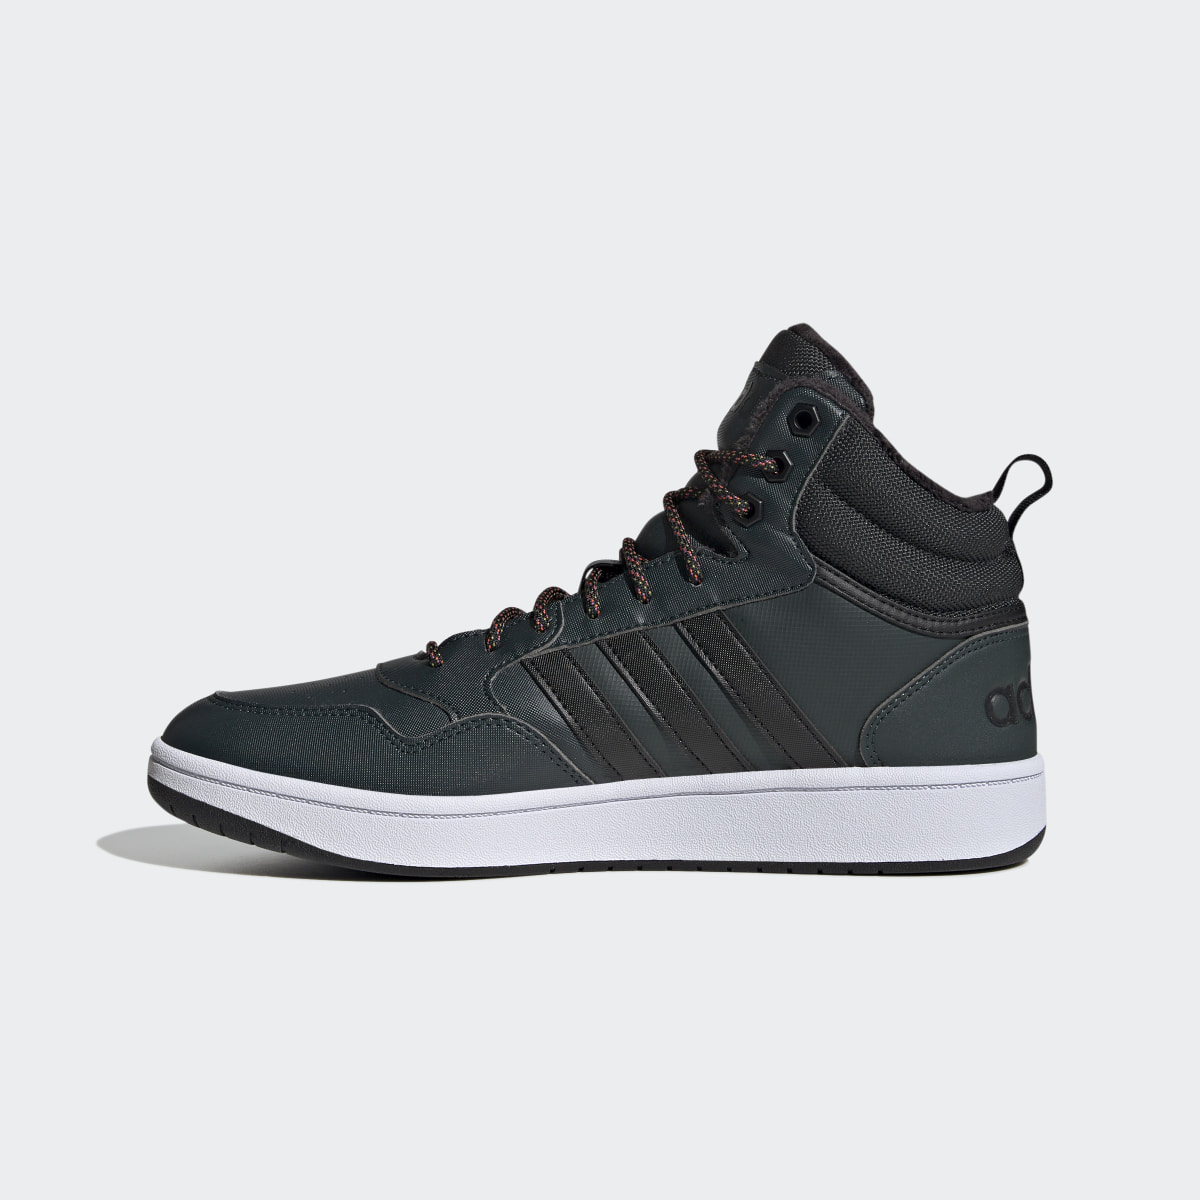 Adidas Chaussure Hoops 3.0 Mid Lifestyle Basketball Classic Fur Lining Winterized. 7